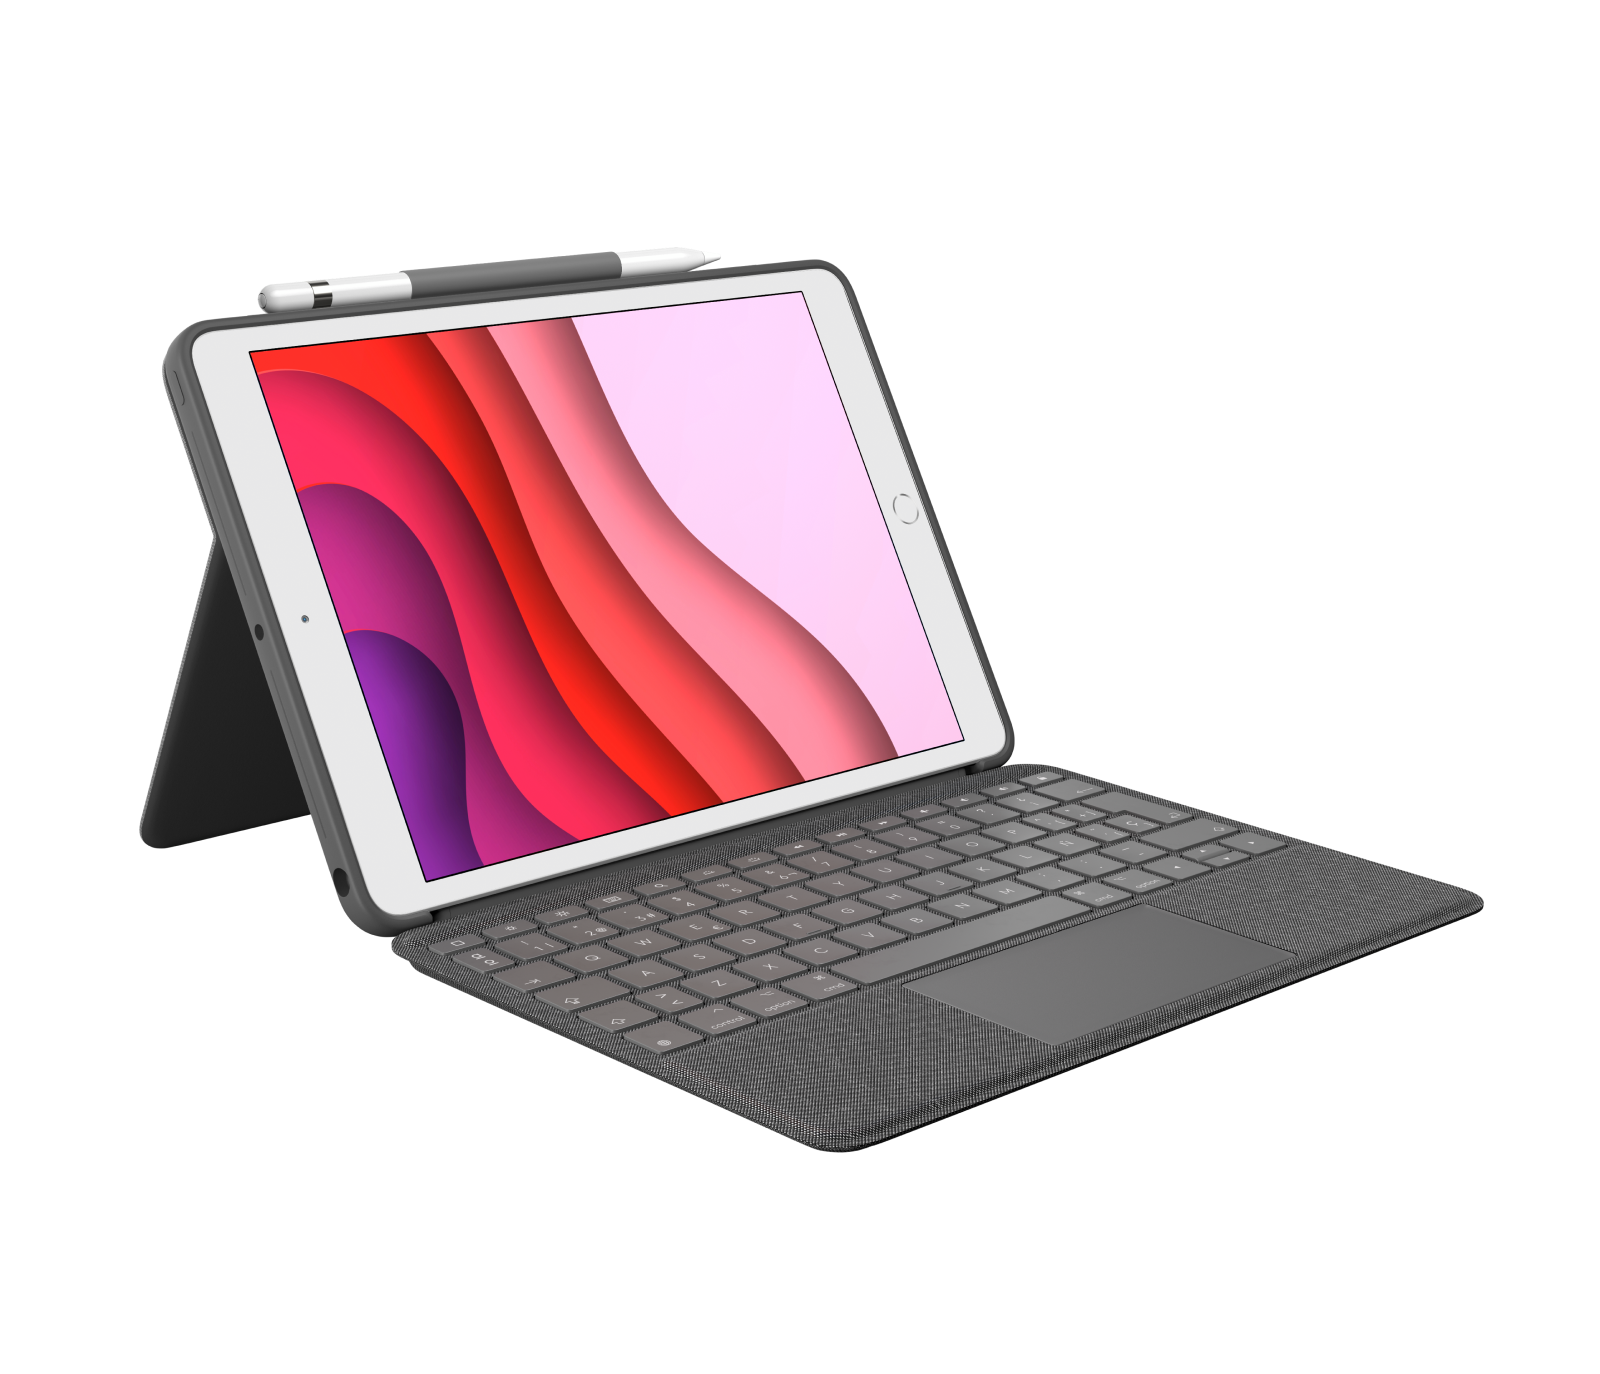 Logitech Combo Touch - iPad Keyboard Case with Trackpad